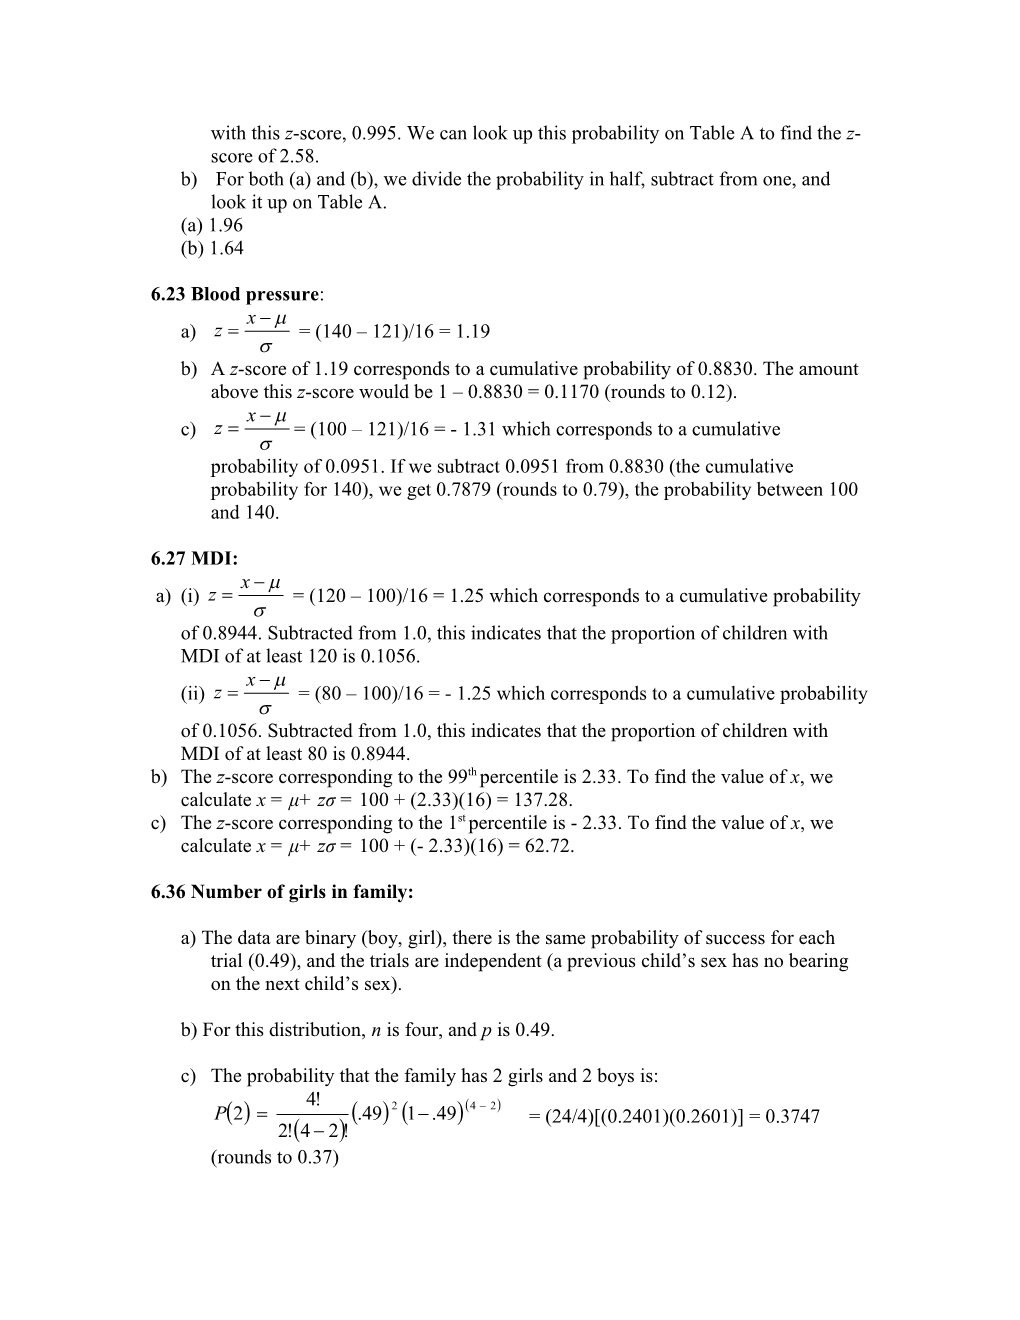 Solutions - Probability Distributions